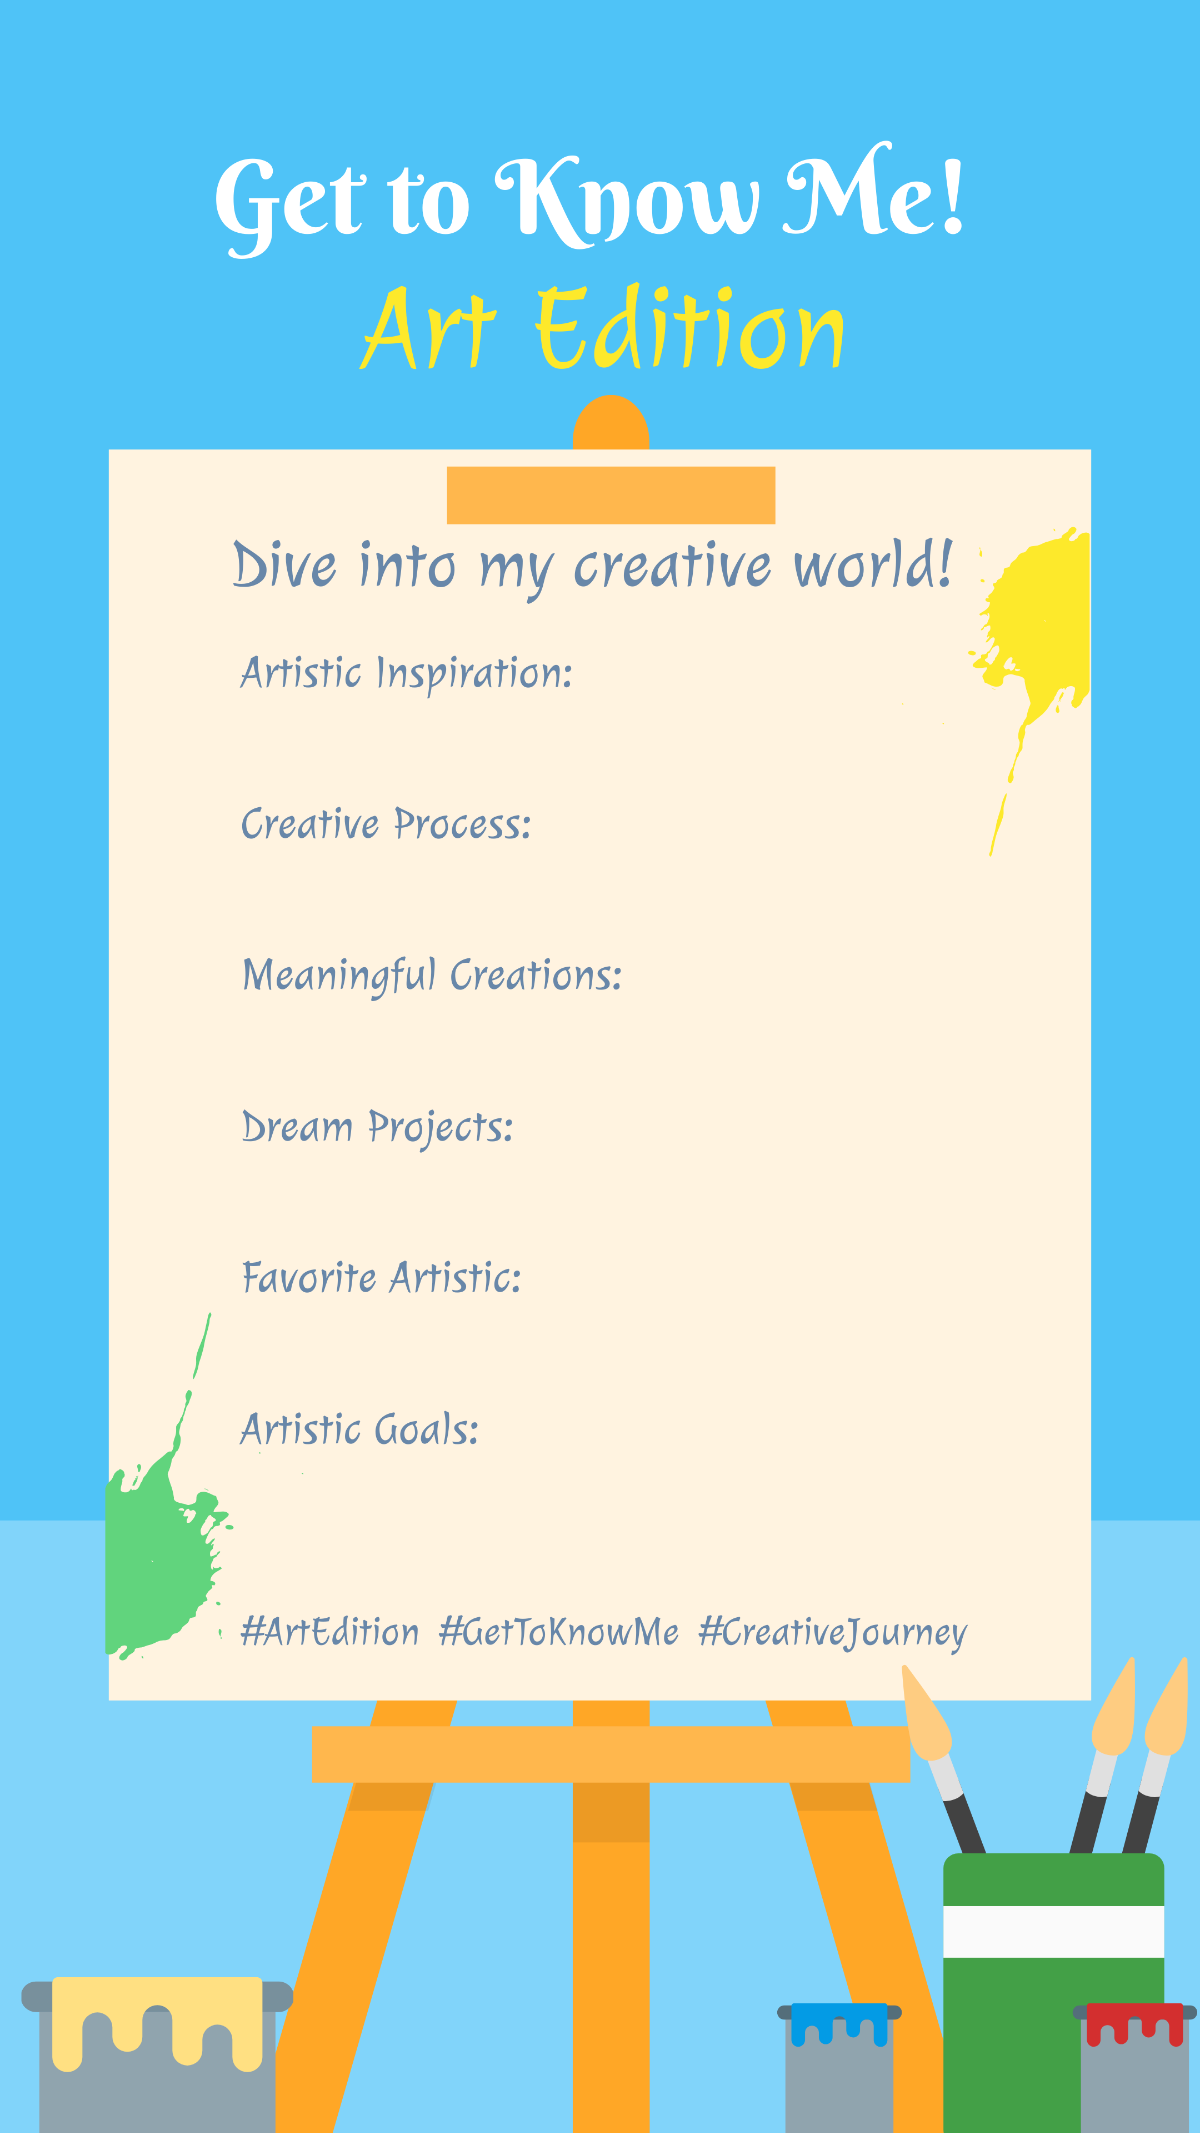 Get to Know Me Art Edition Story